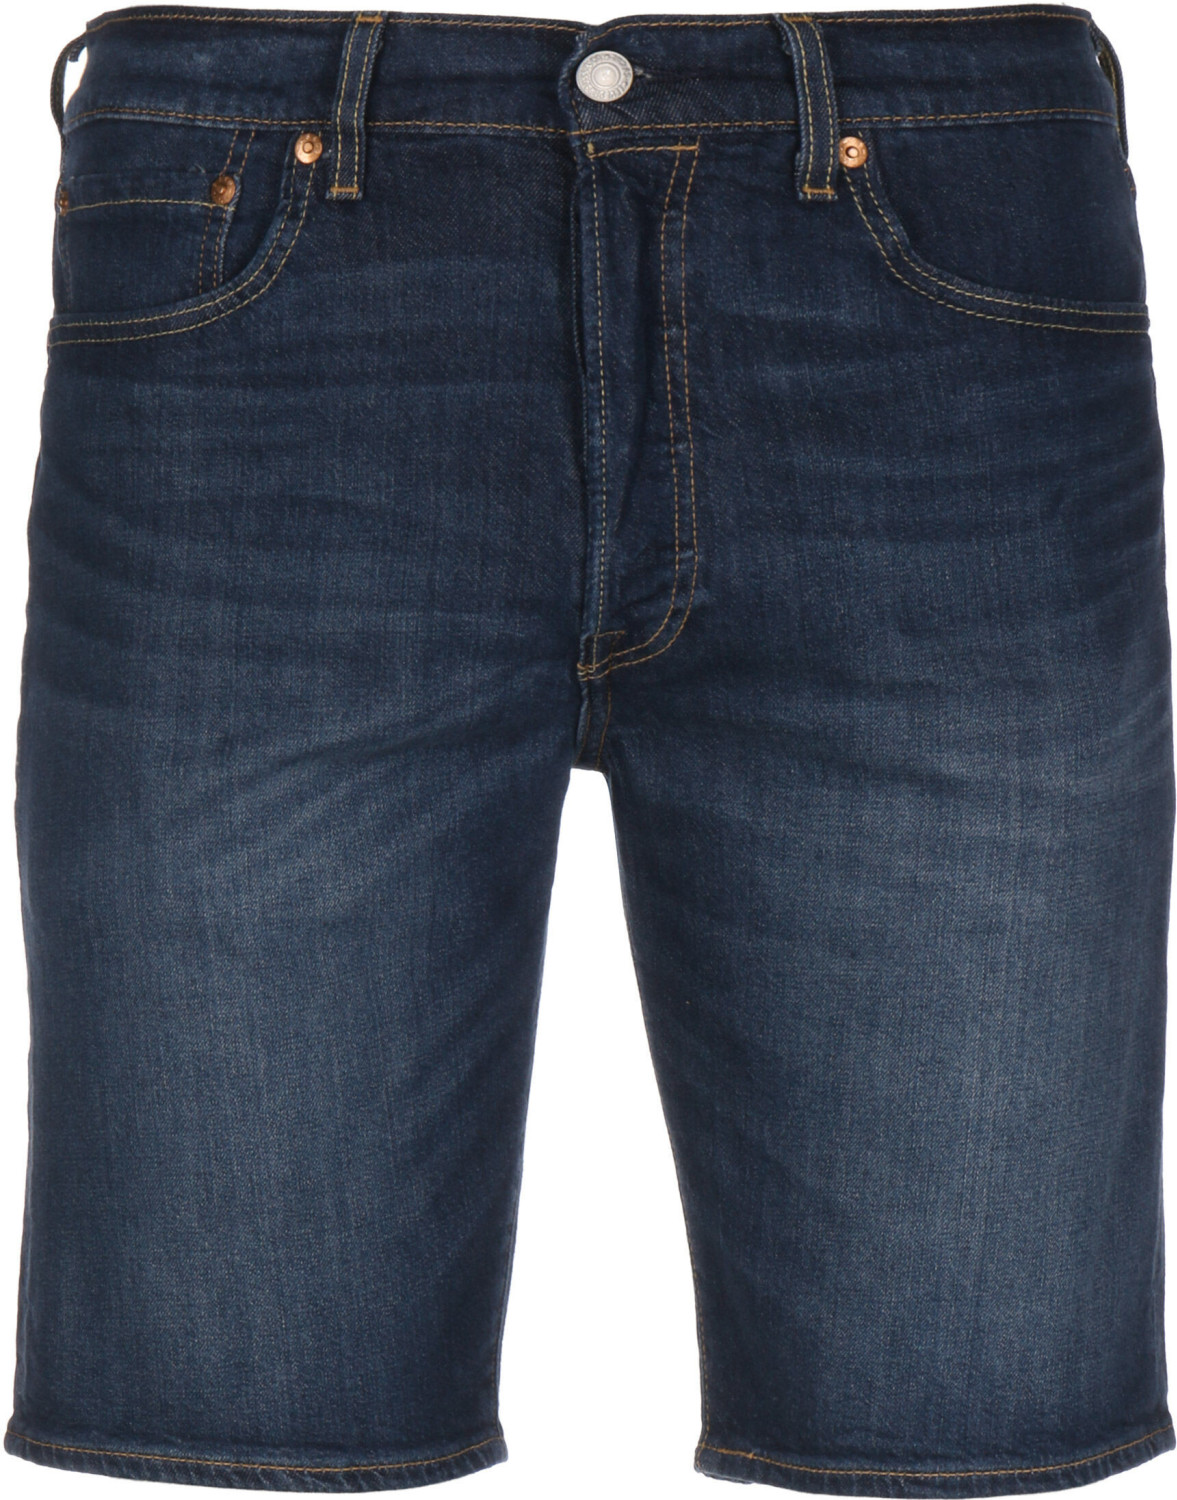 Buy Levi's 501 Original Fit Shorts (36512) roast beef from £25.00 ...